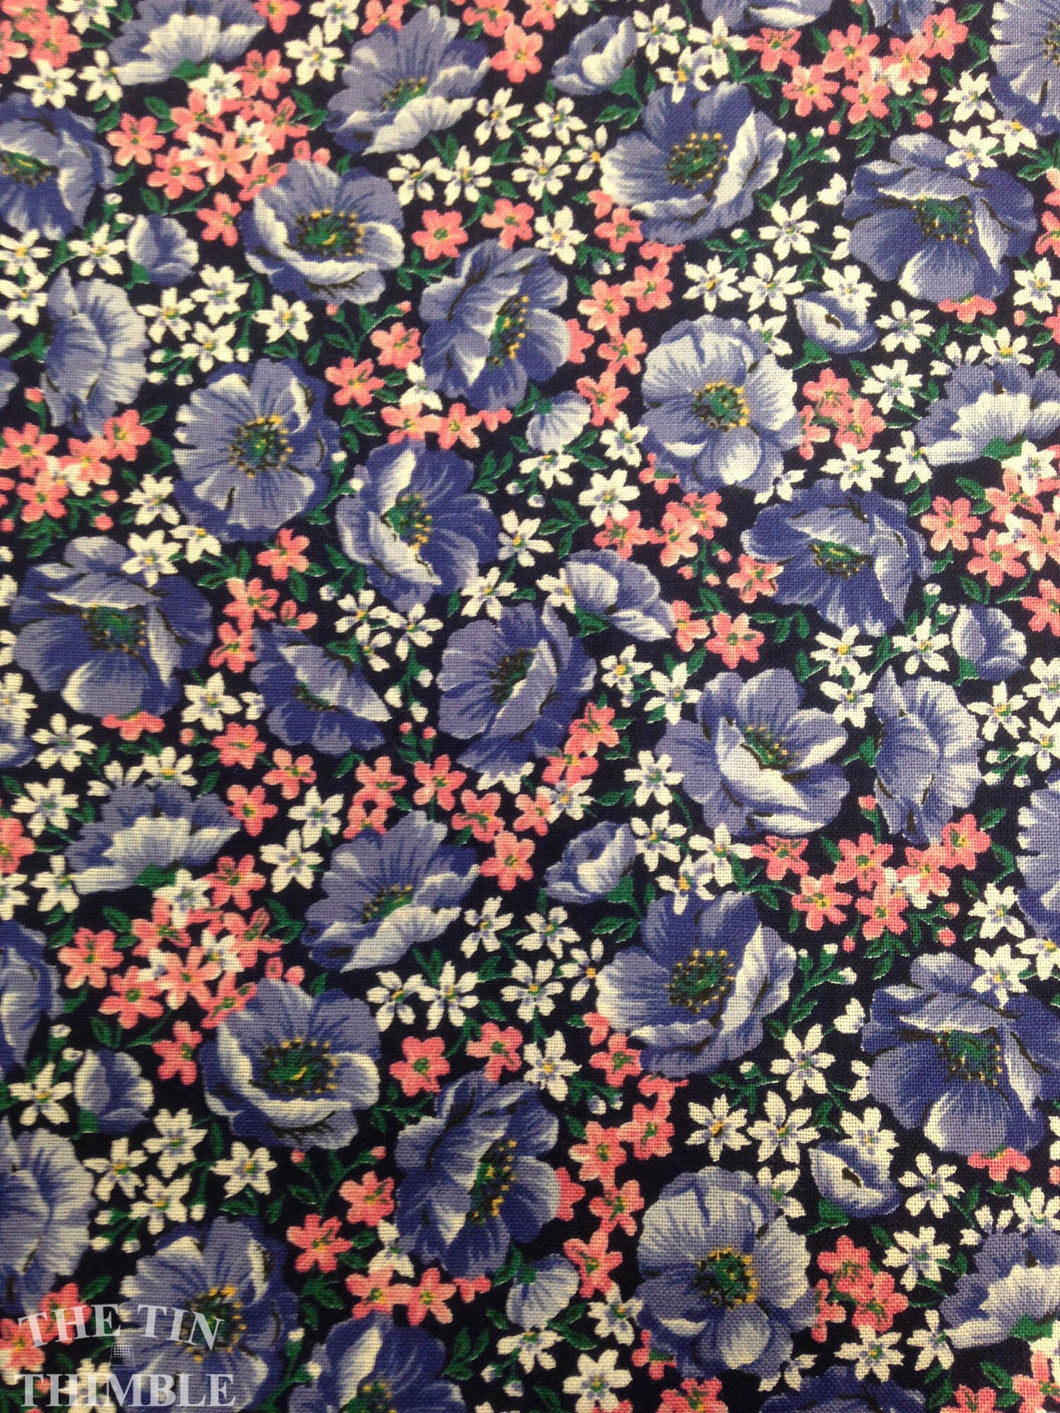 Purple Floral Quilting Fabric by Cranston Print Works - 3/4 Yard / Cotton / Cotton Floral / White Flowers / Purple White